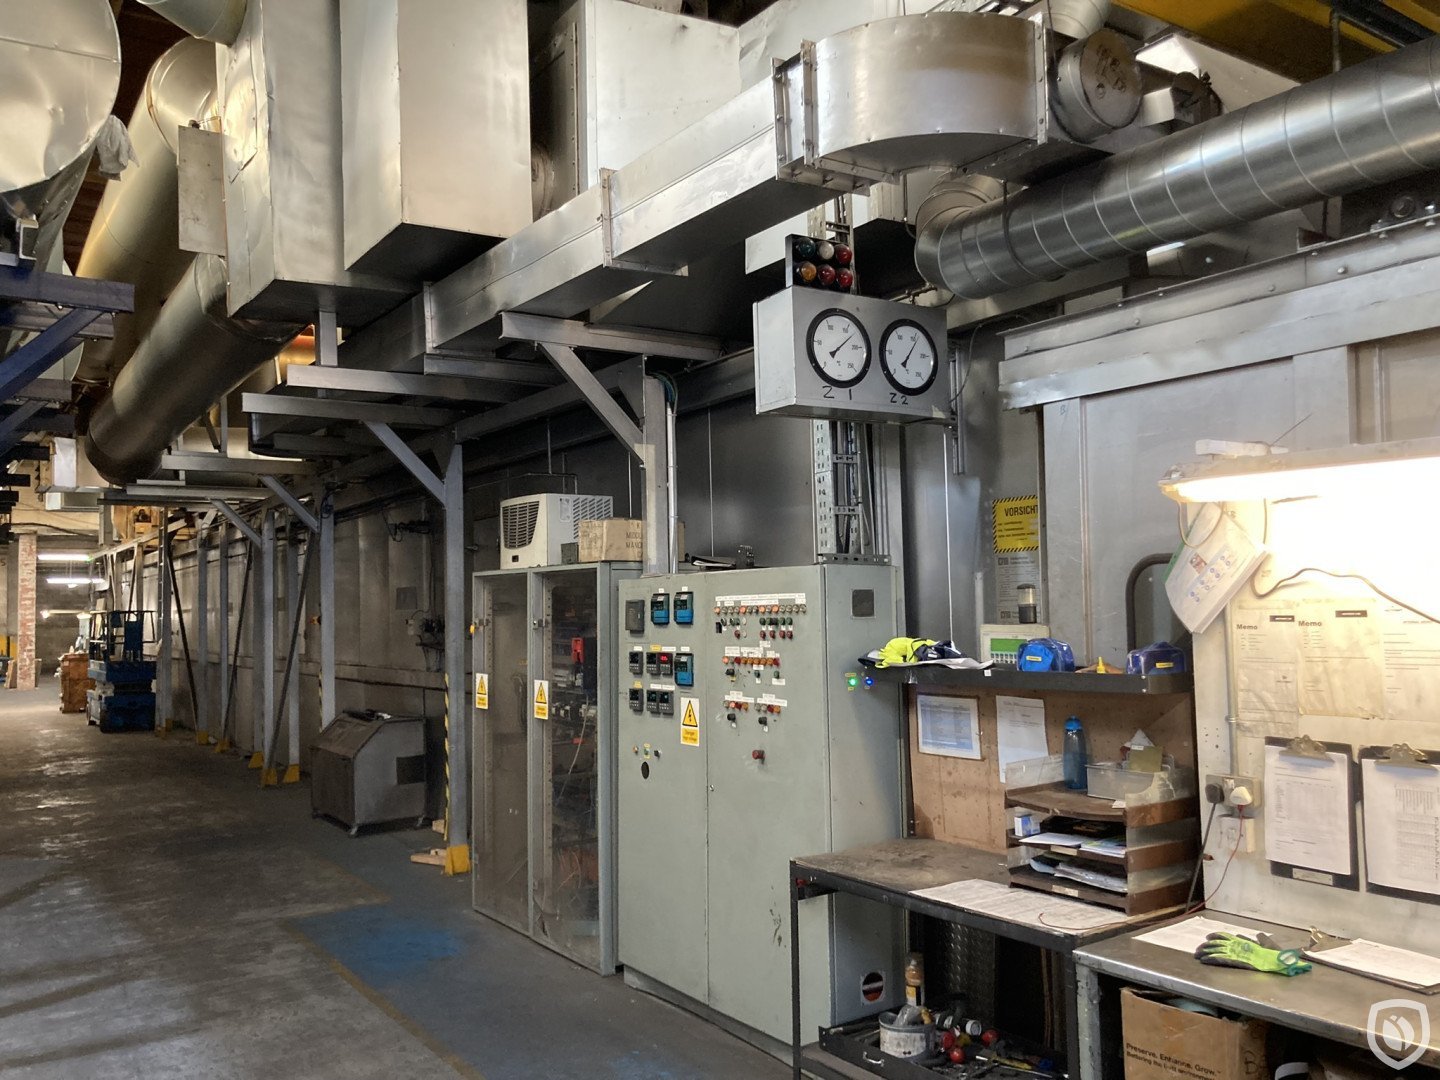 FUJI-C451 coating line with 28 meter LTG tunnel-oven and incinerator